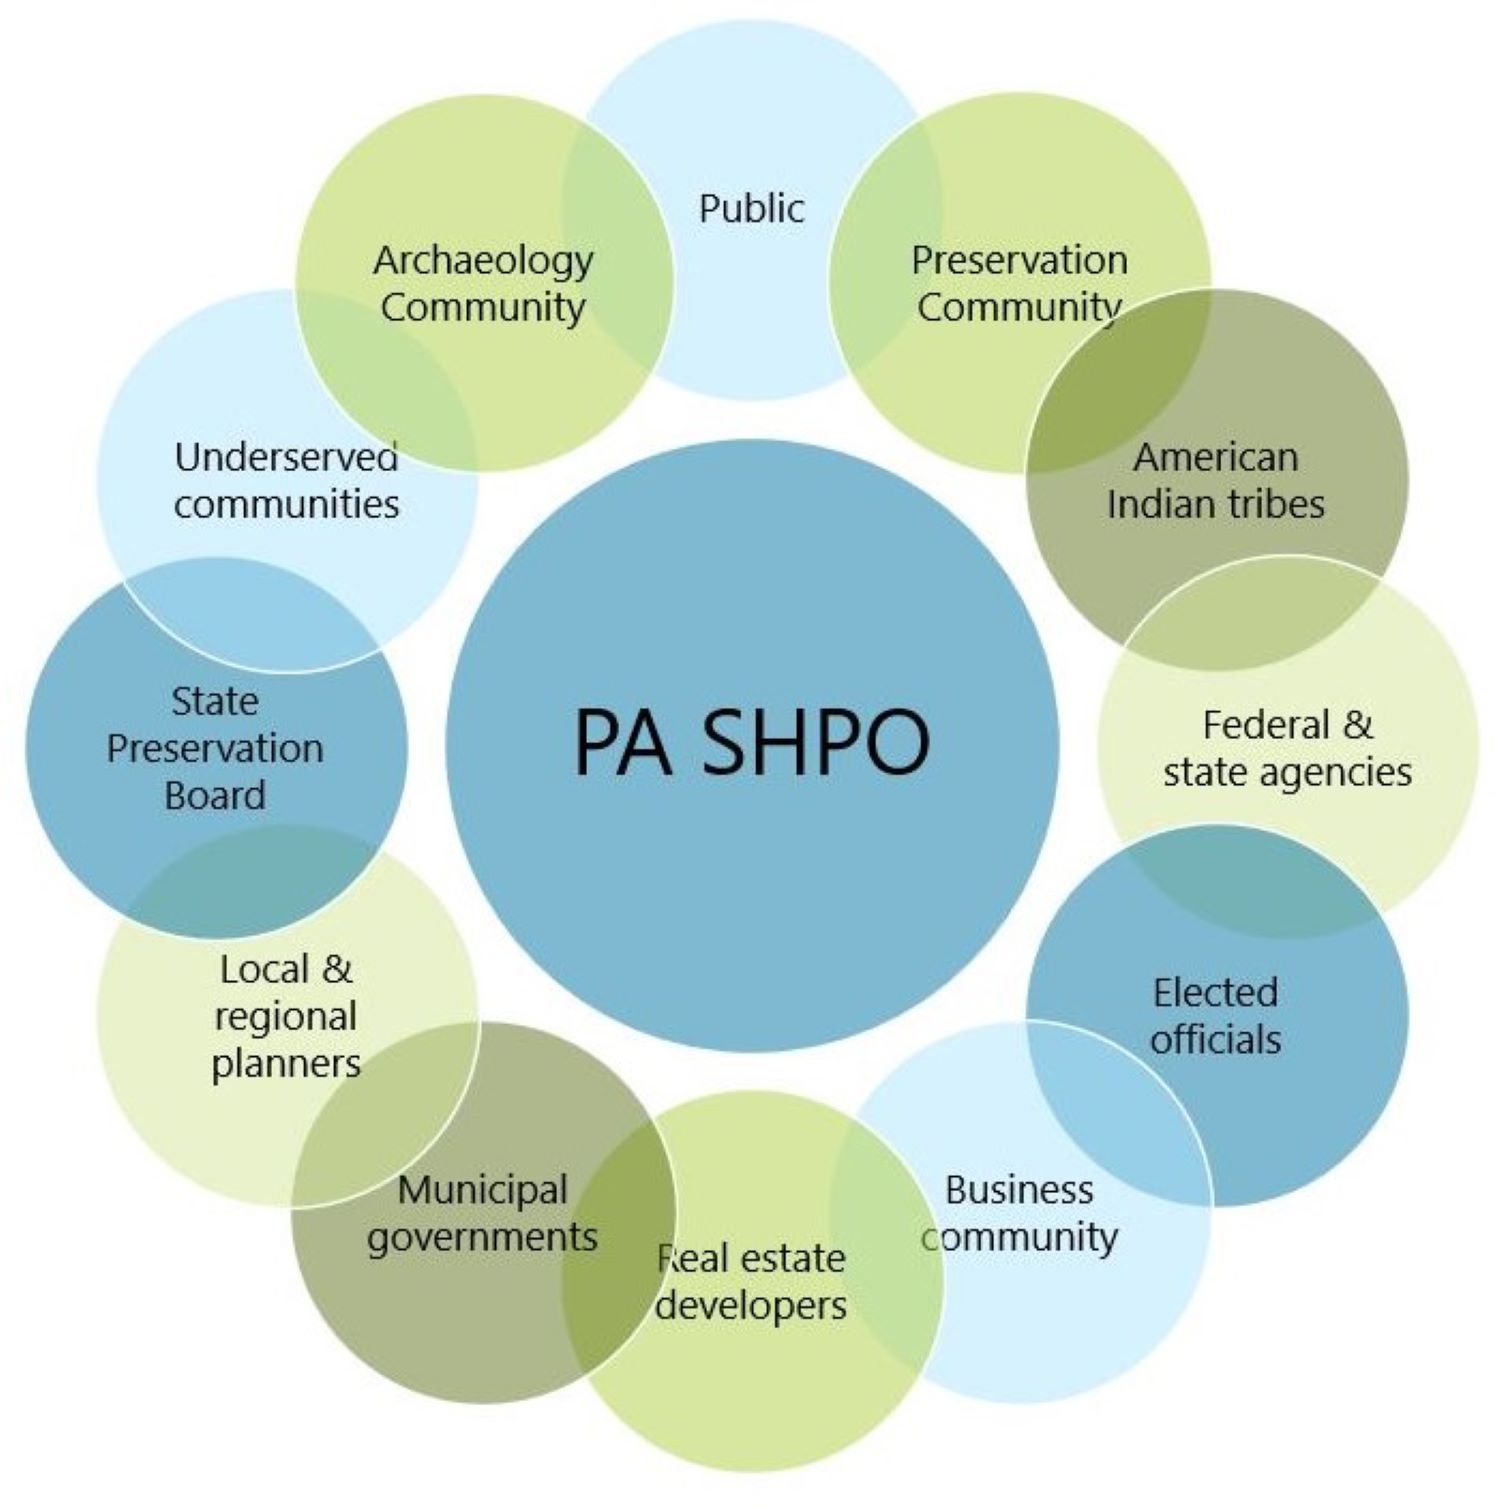 Large circle with the words "PA SHPO" surrounded by many smaller colorful circles